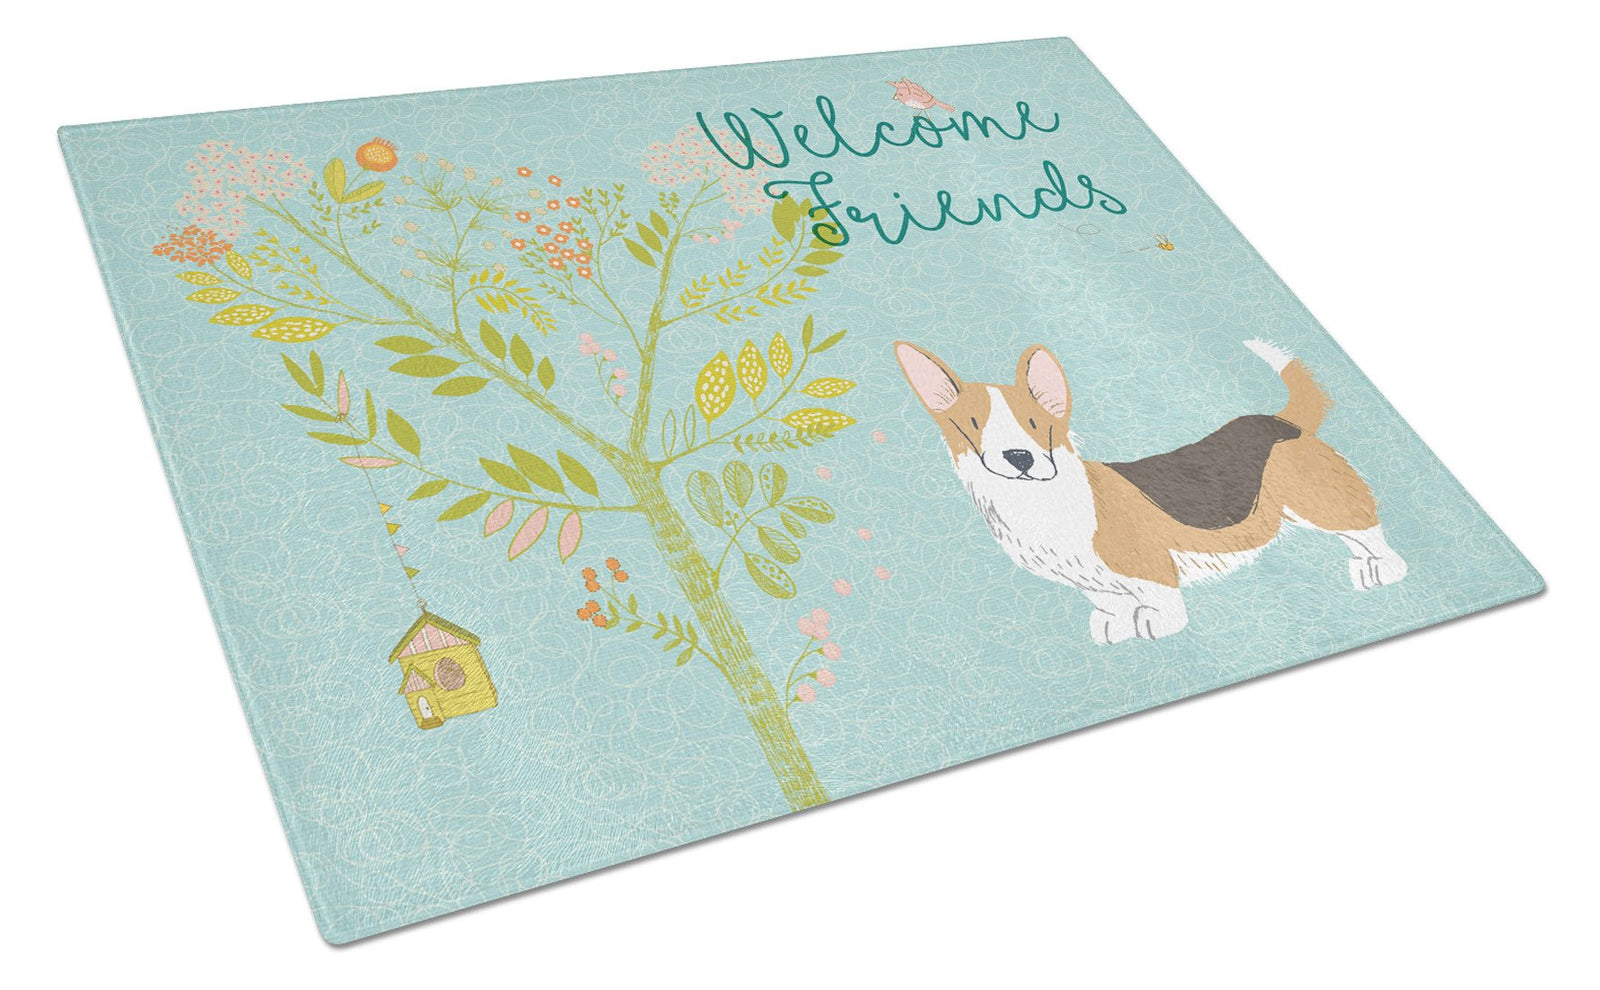 Welcome Friends Pembroke Welsh Corgi Tricolor Glass Cutting Board Large BB7610LCB by Caroline's Treasures